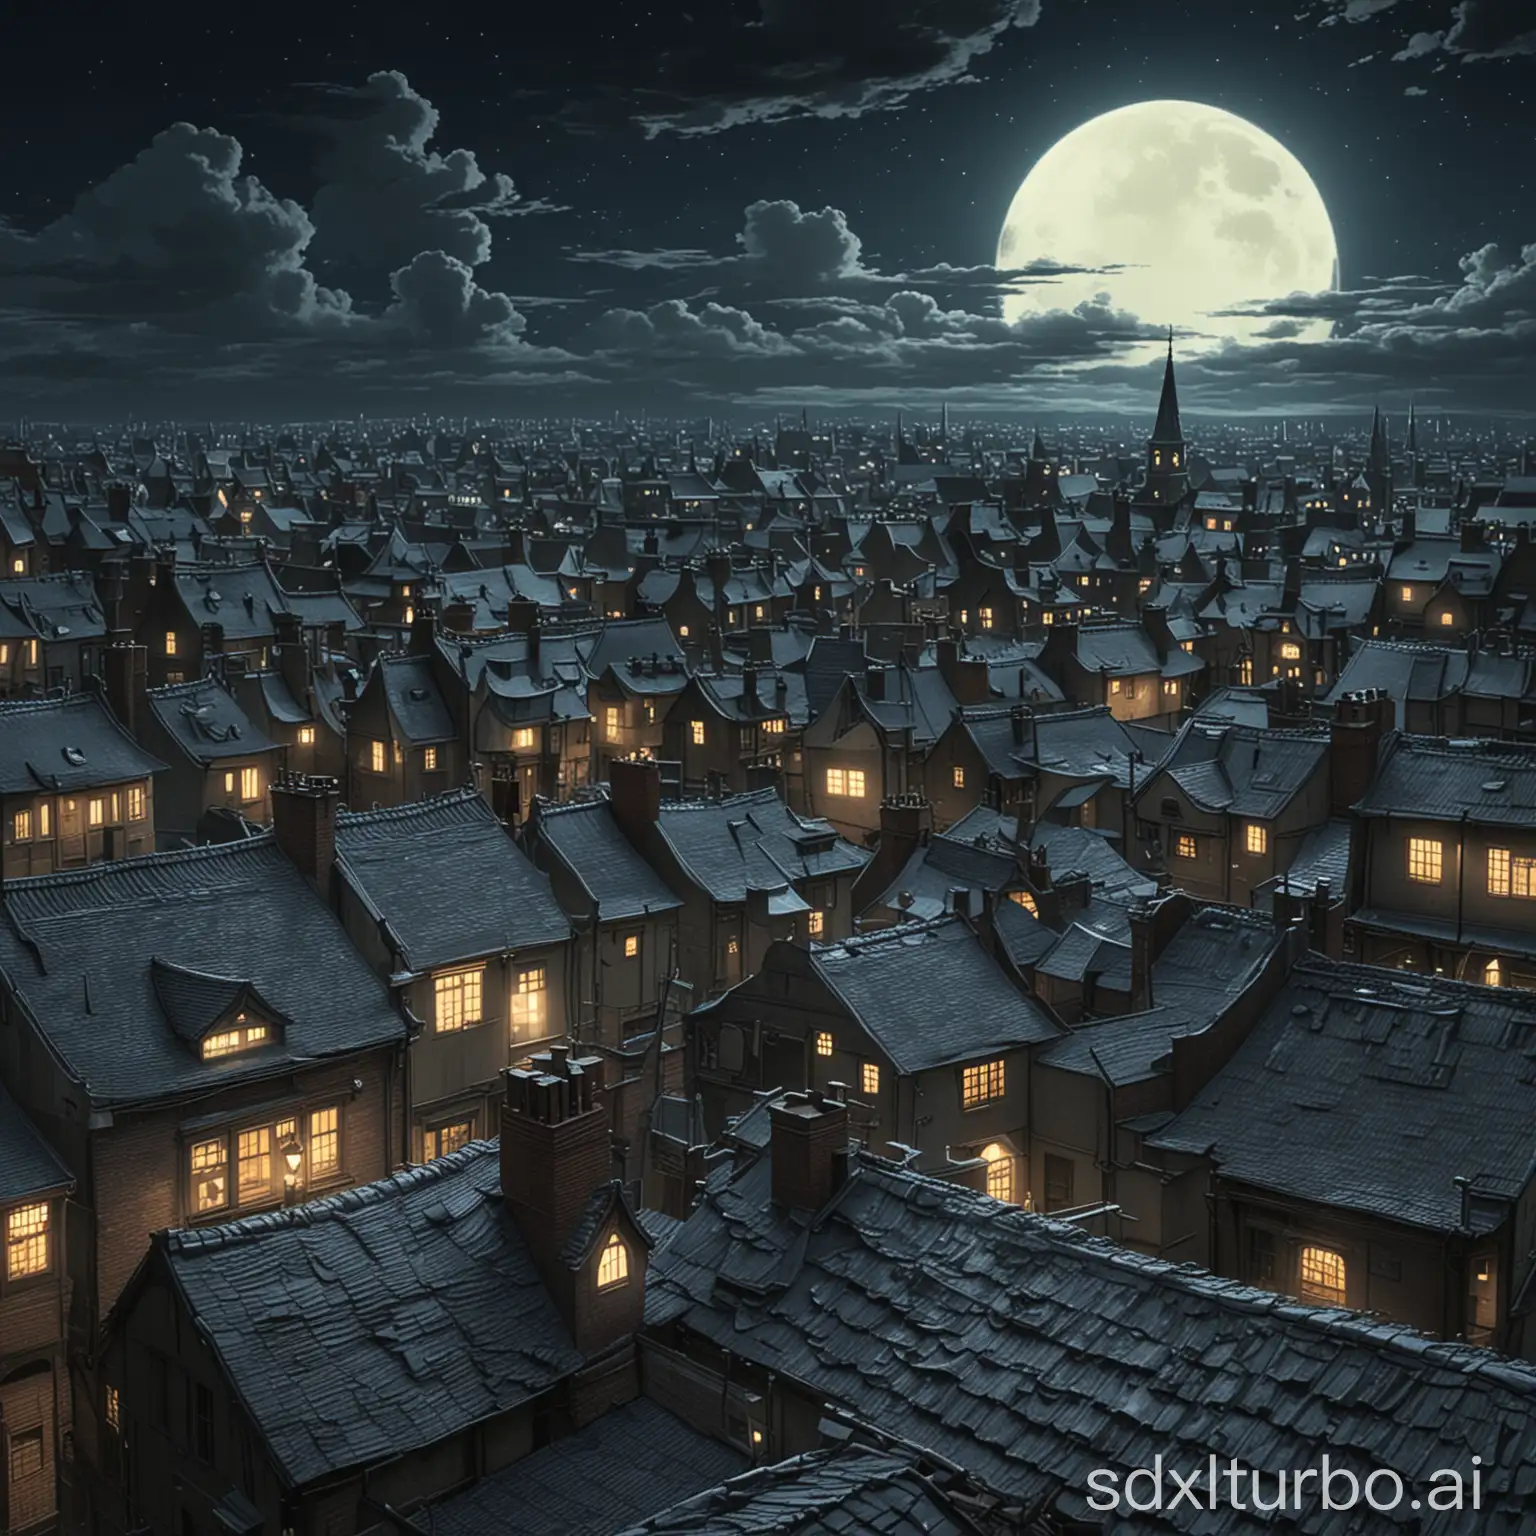  Victorian roofscape at night, pale moonlight illuminating the scene, aerial view, studio ghibli style

(The input is already in English, so there's no need for translation.)